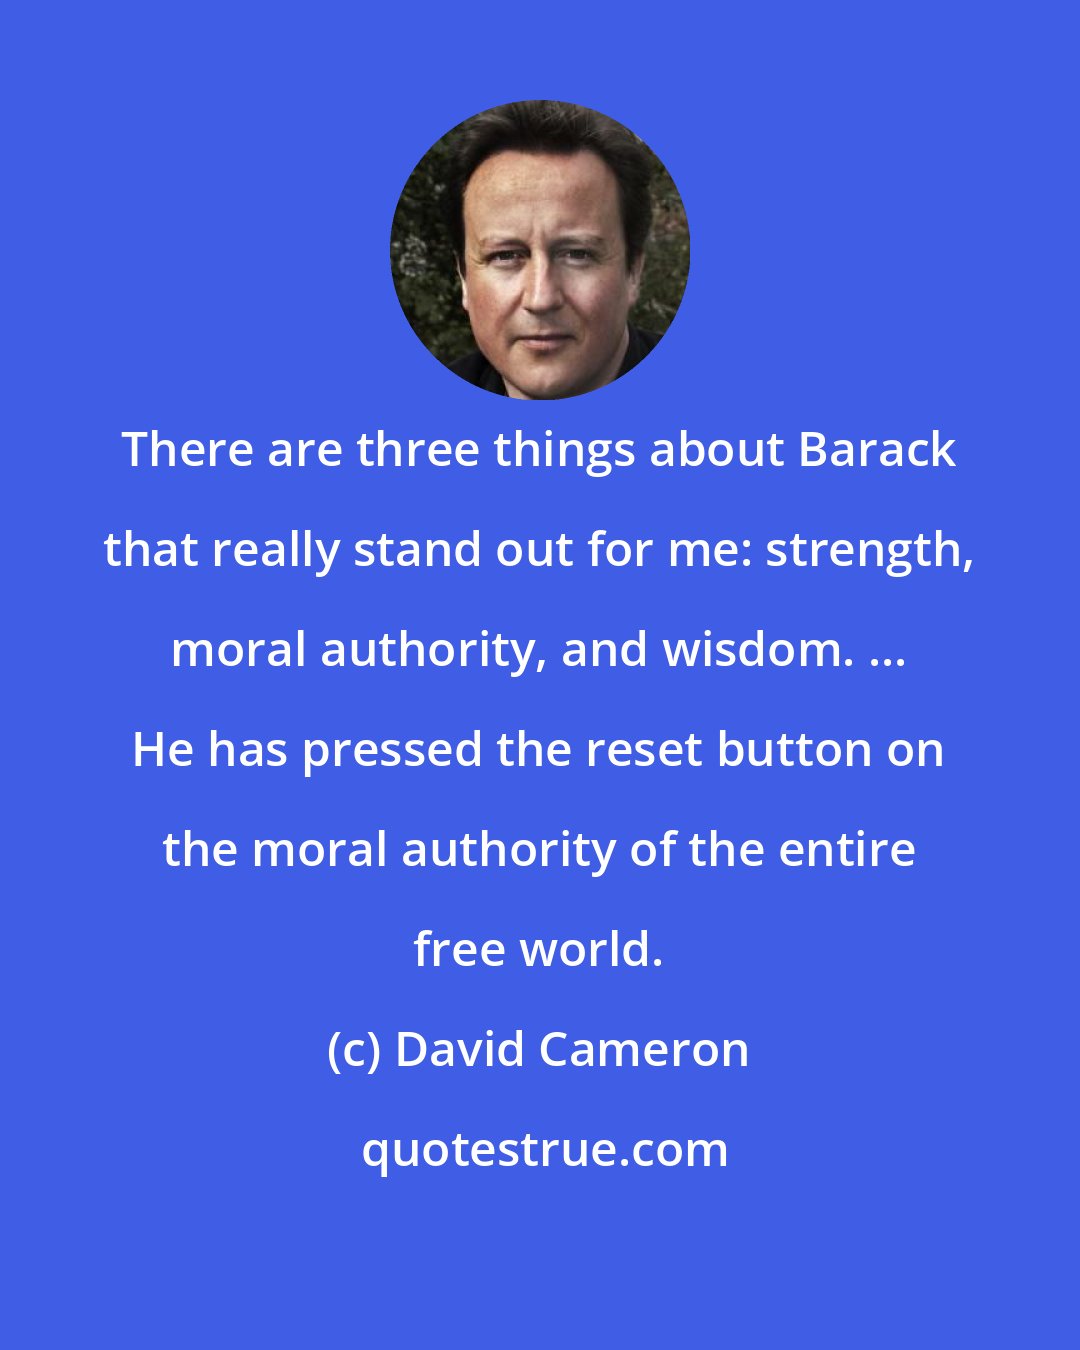 David Cameron: There are three things about Barack that really stand out for me: strength, moral authority, and wisdom. ... He has pressed the reset button on the moral authority of the entire free world.